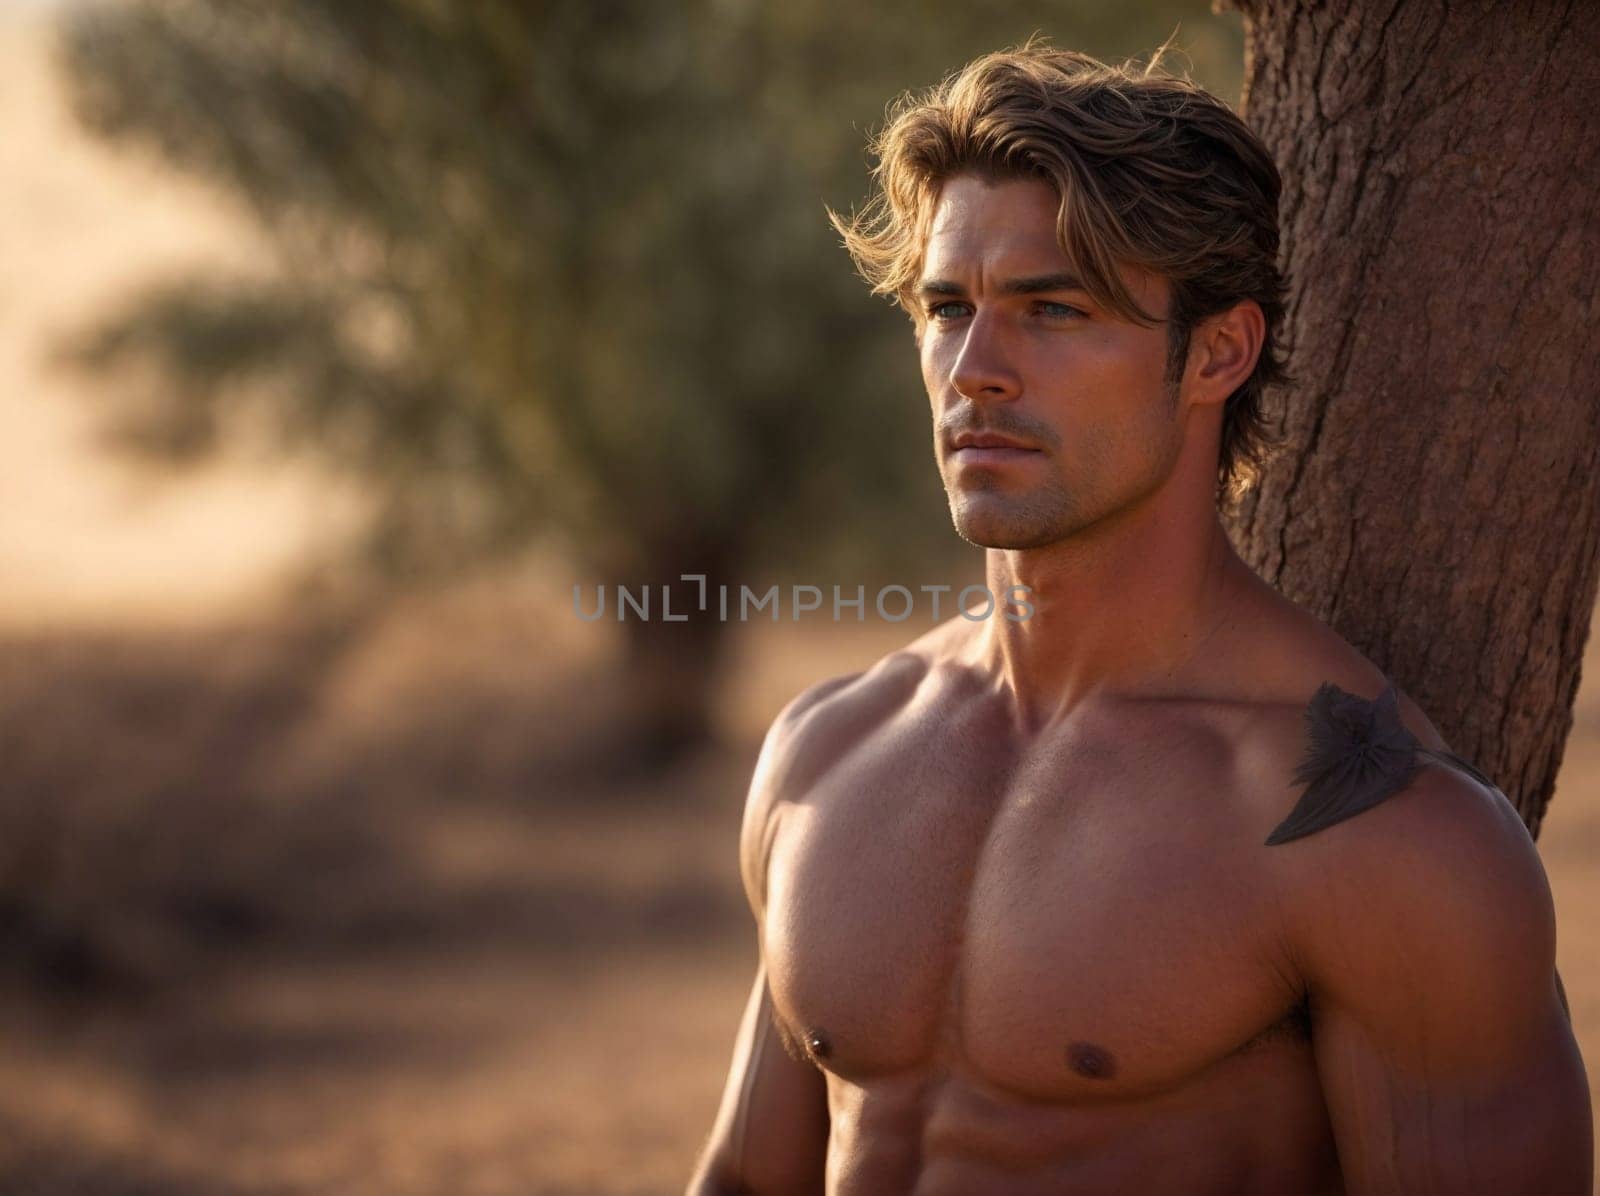 A shirtless man standing confidently next to a tall tree in a serene forest setting.